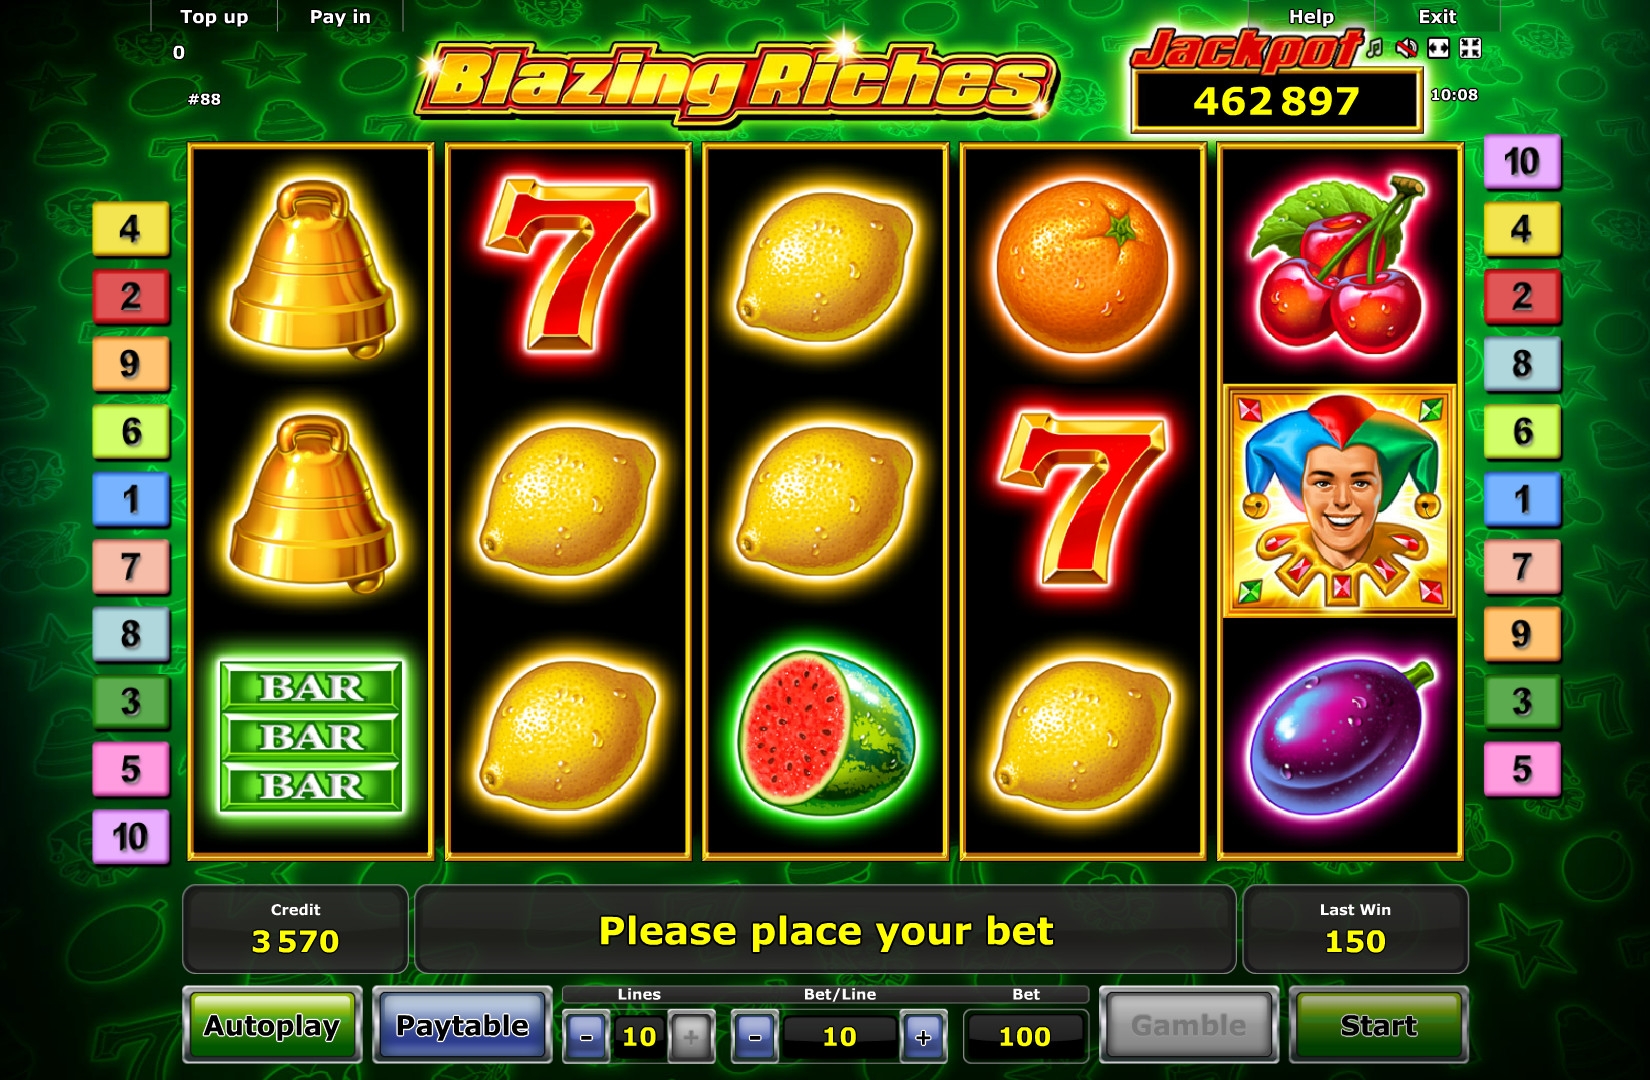 Blazing Riches (Blazing Riches) from category Slots